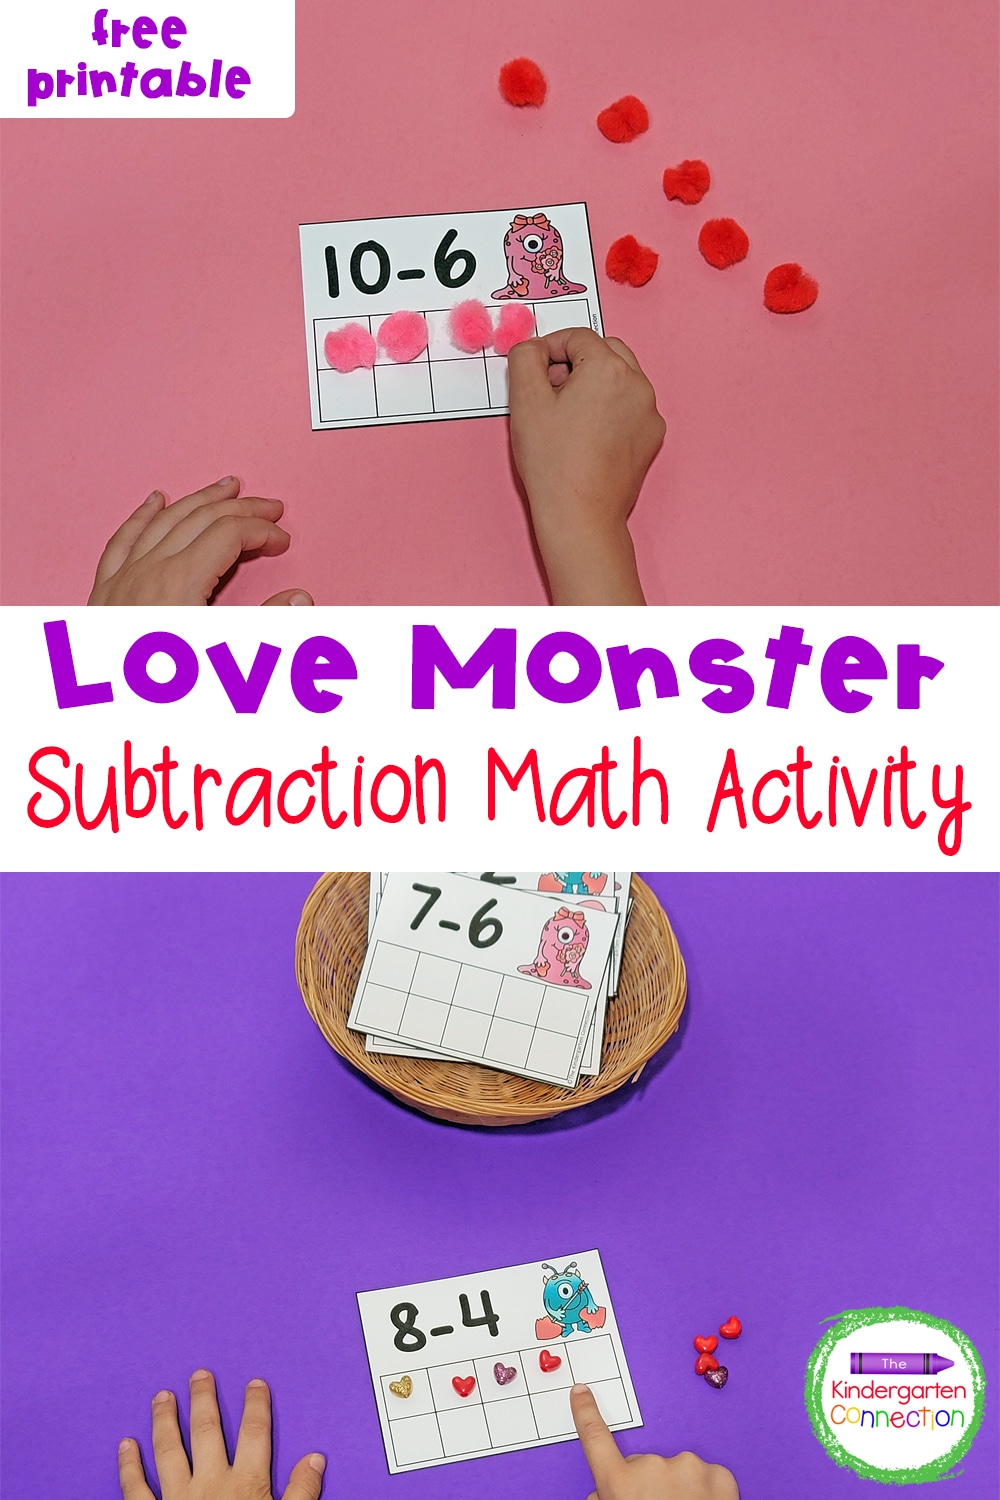 Make math centers hands-on, engaging, and fun this Valentine's Day with these free printable Love Monster Subtraction within 10 Cards!